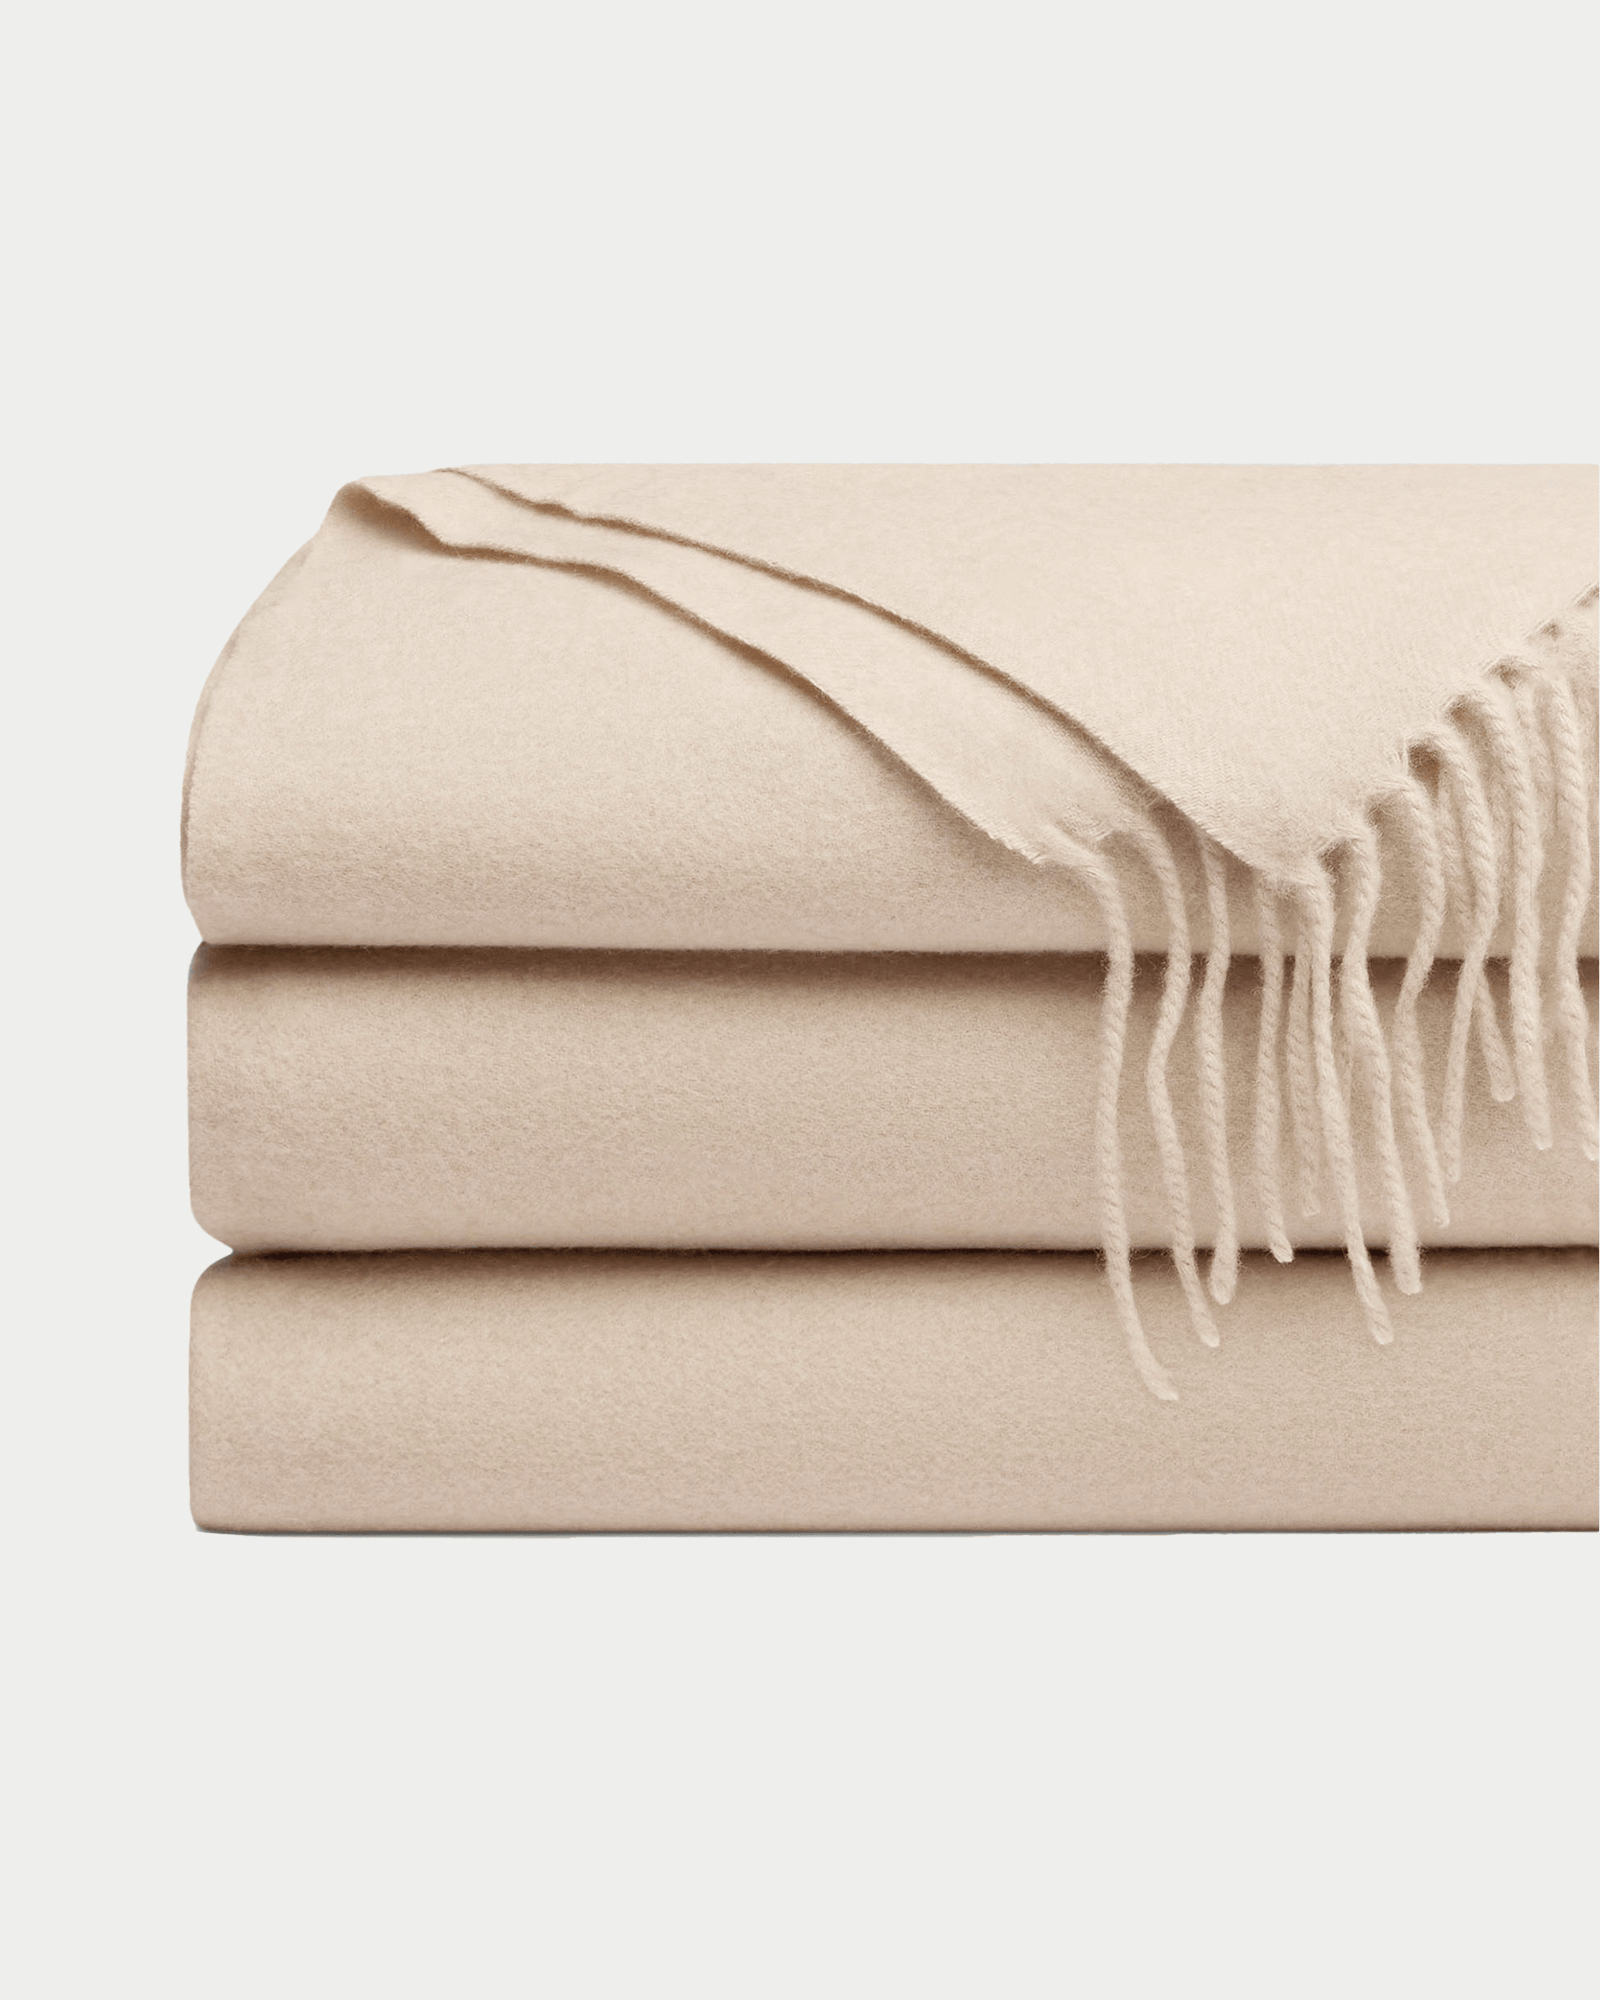 Dune cashmere tassel throw folded with white background 